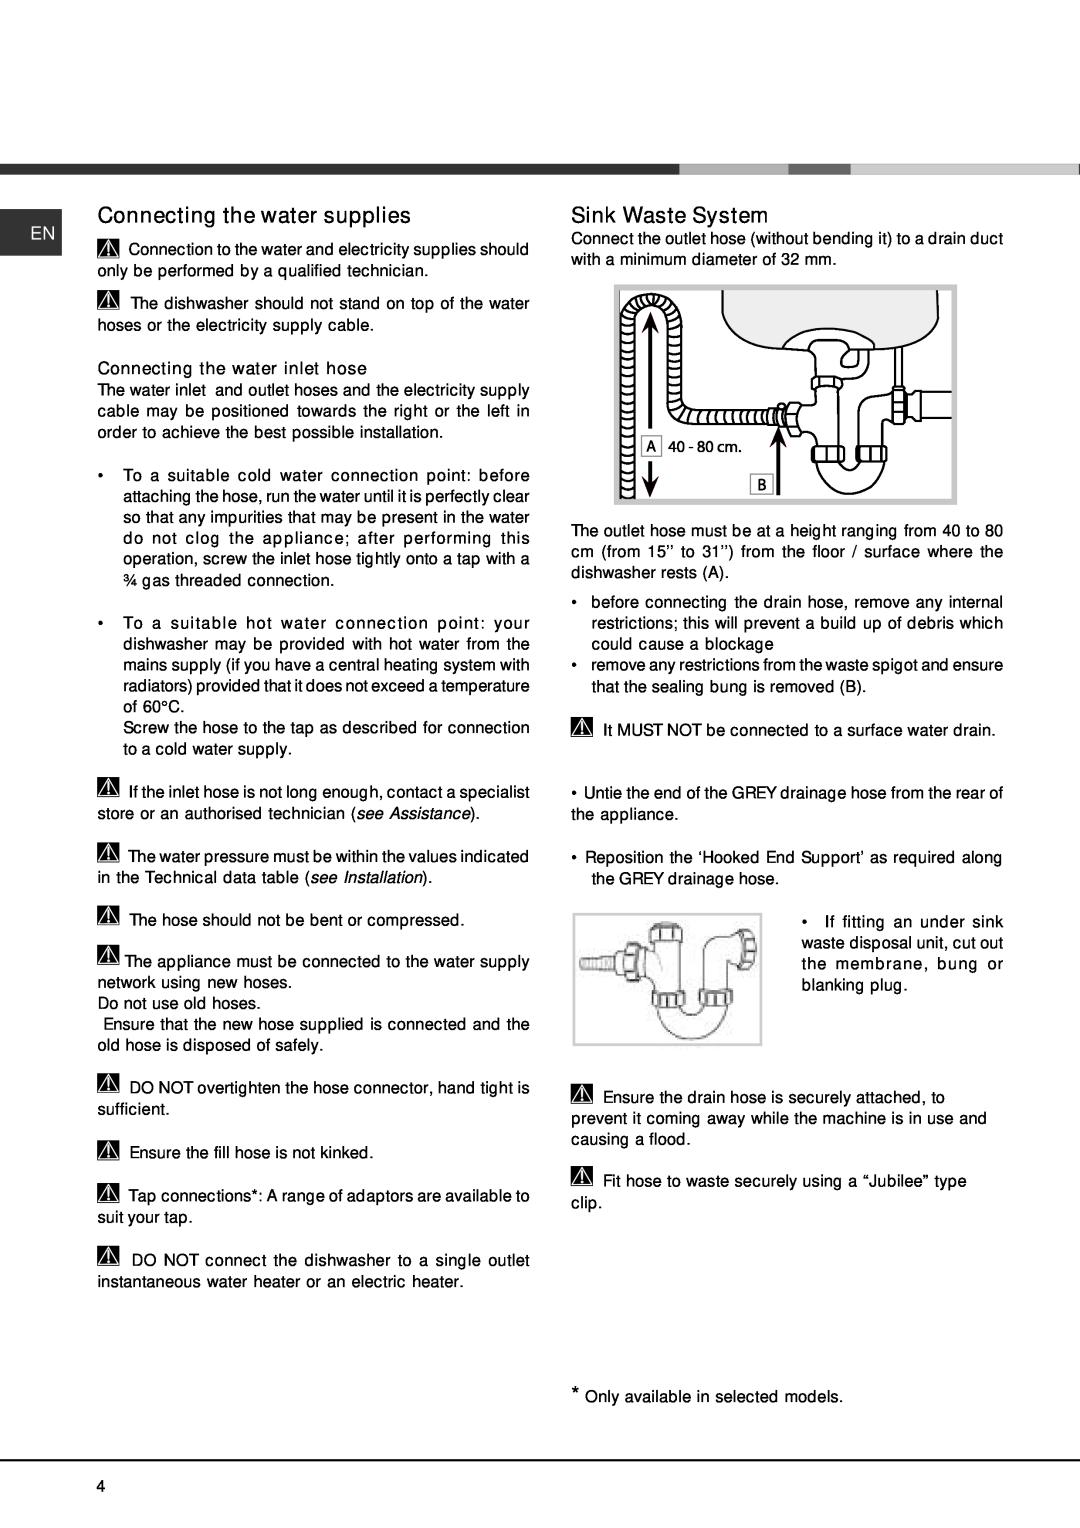 Hotpoint LFT 2284, Dishwasher manual Connecting the water supplies, Sink Waste System, Connecting the water inlet hose 